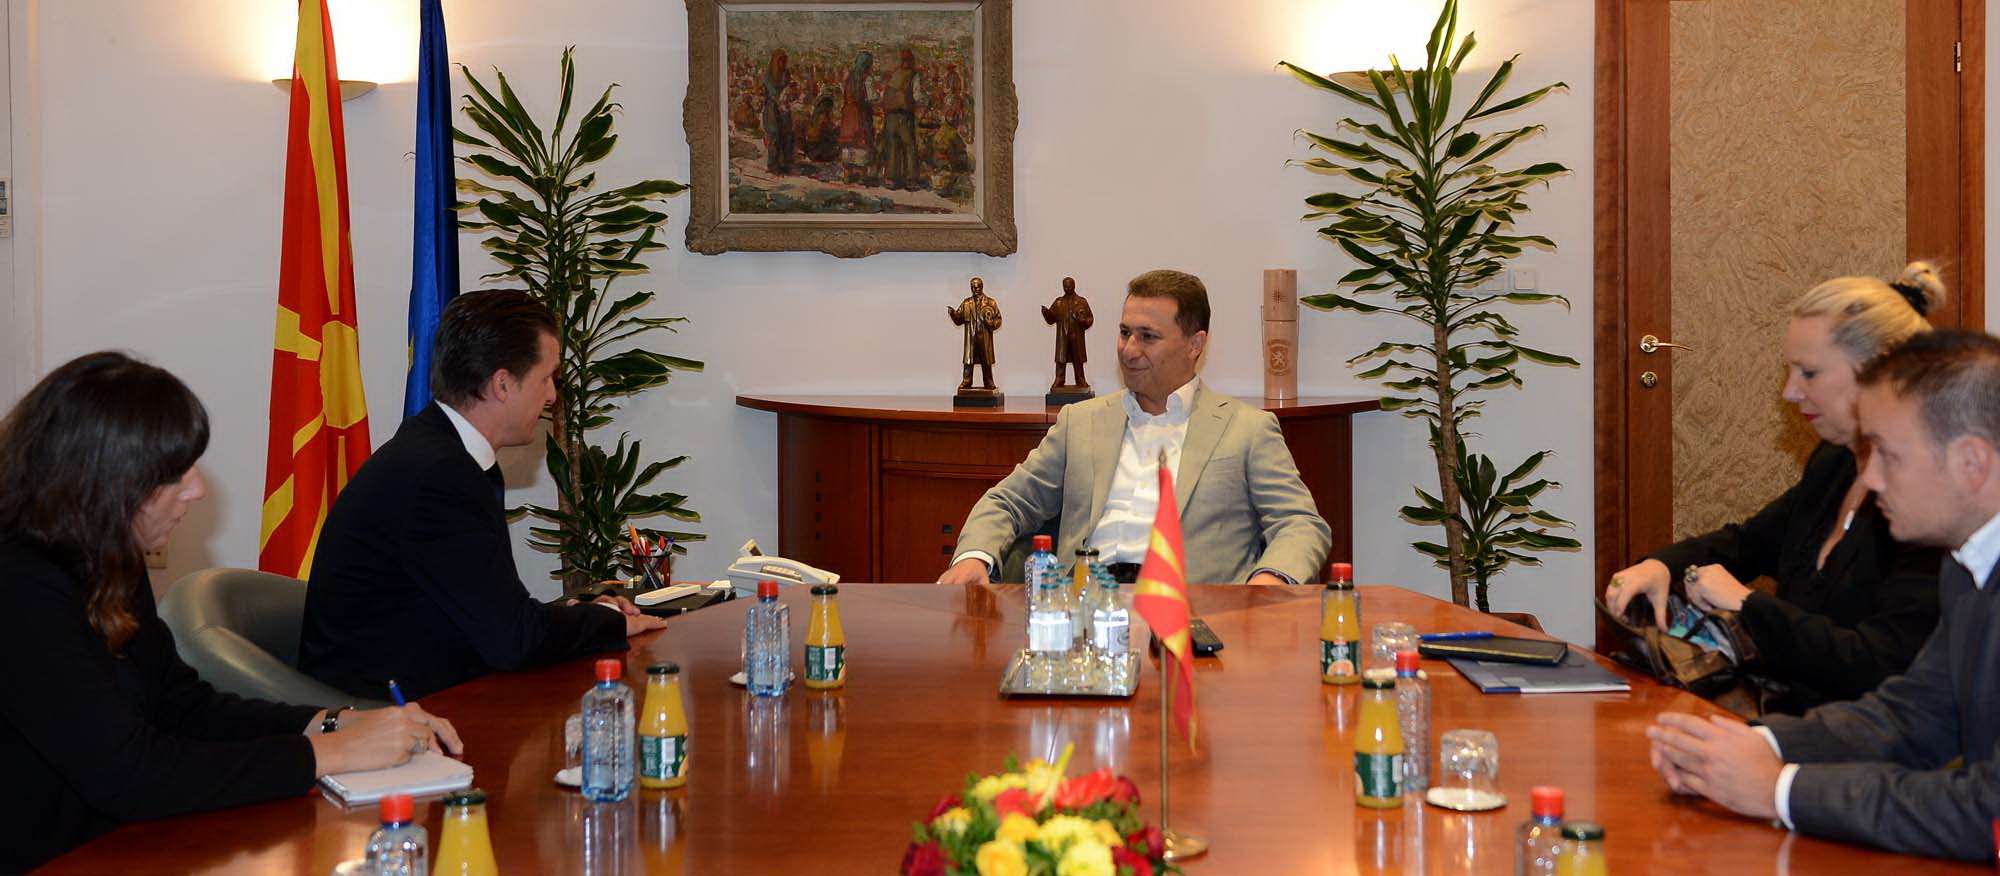 Meeting of a MP of the German Bundestag with the Prime Minister of the Republic of Macedonia Nikola Gruevski